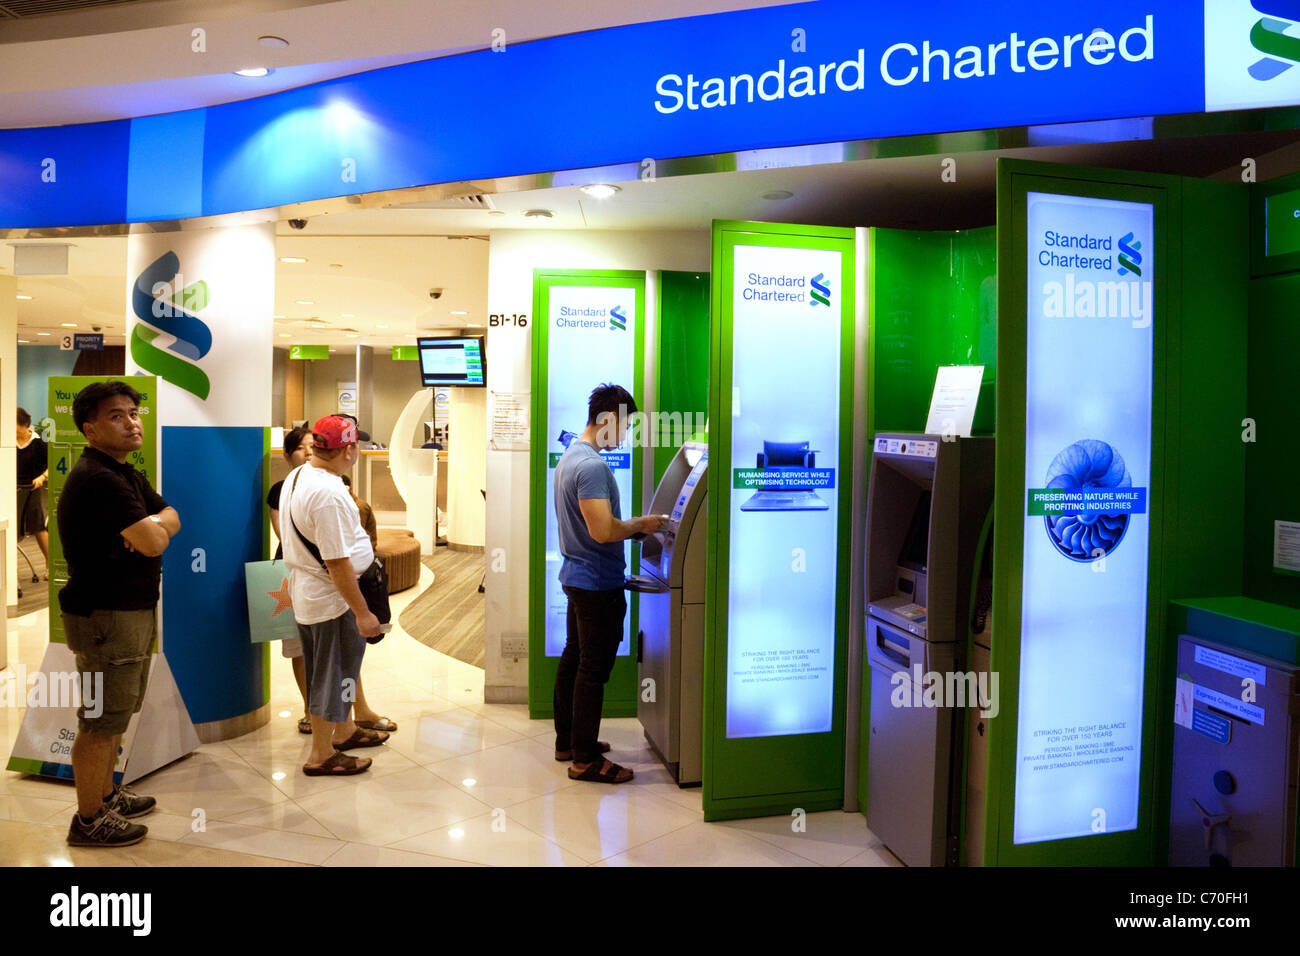 Standard Chartered High Resolution Stock Photography And Images Alamy